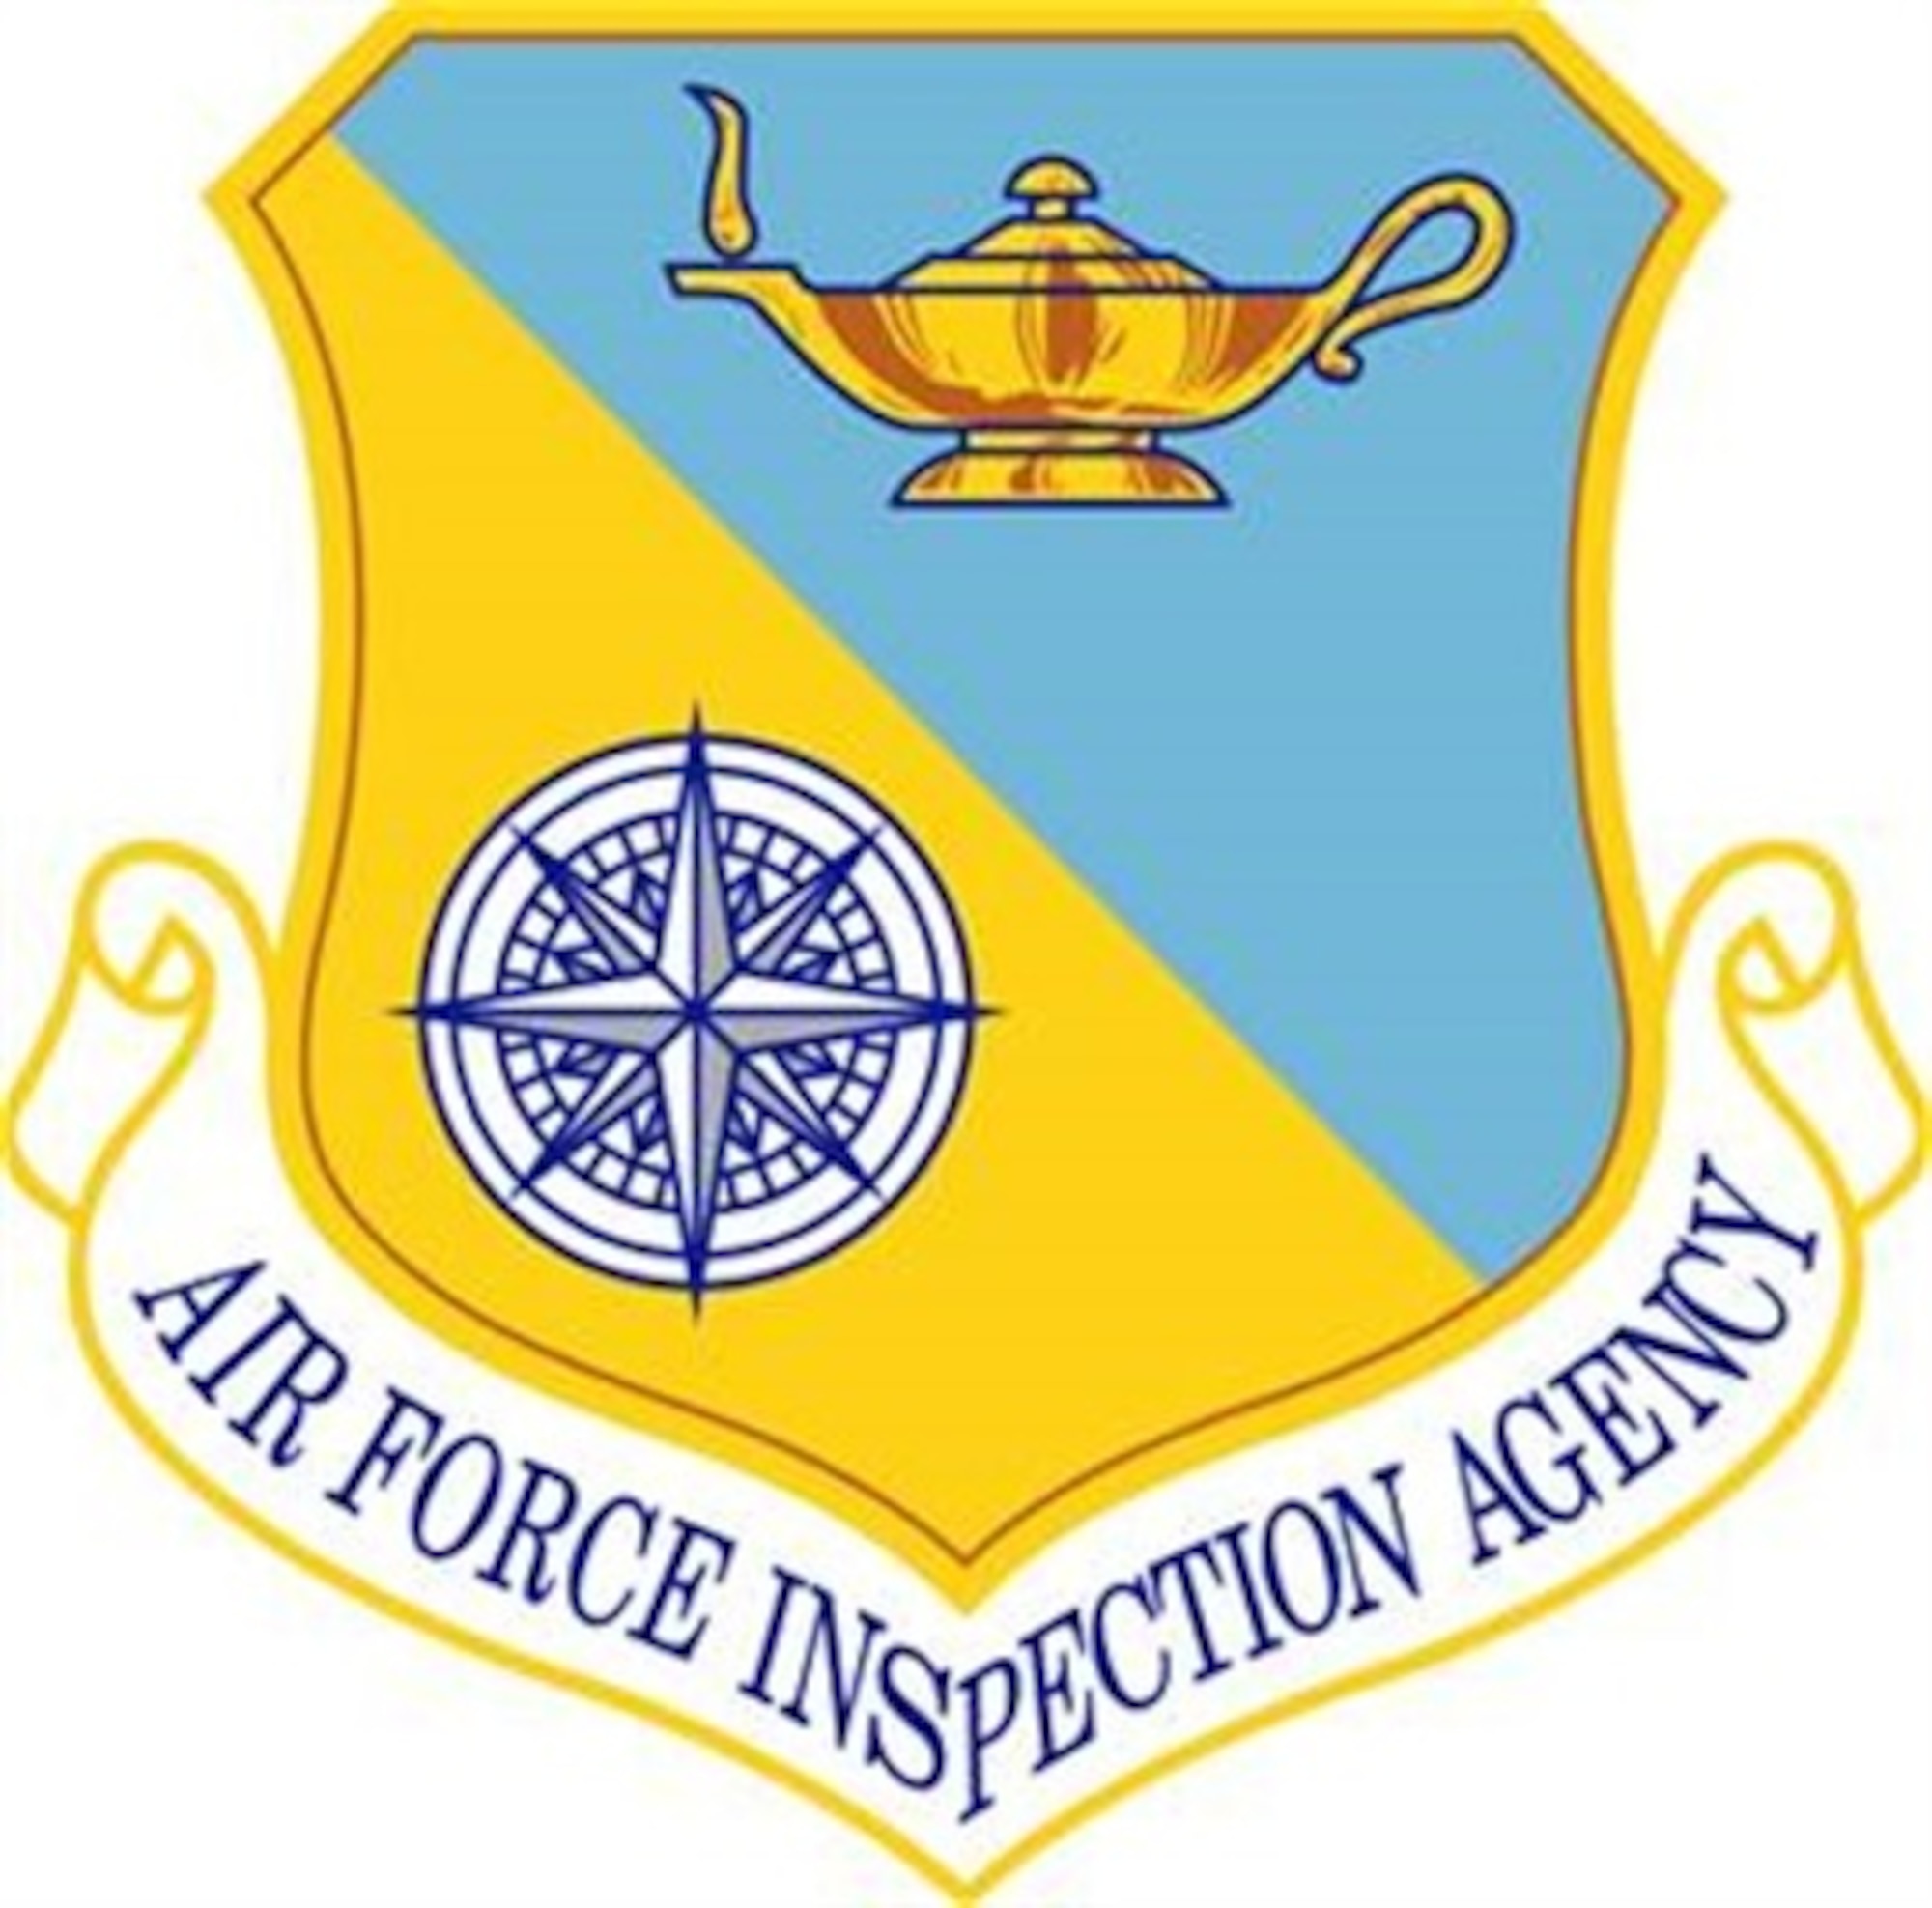 Members of the Air Force Inspection Agency visited the Air Force District of Washington 13-14 January to help the Headquarters remain mission-ready. The inspection is part of a new Air Force Inspection System established to change the culture of Air Force inspections. (courtesy graphic)